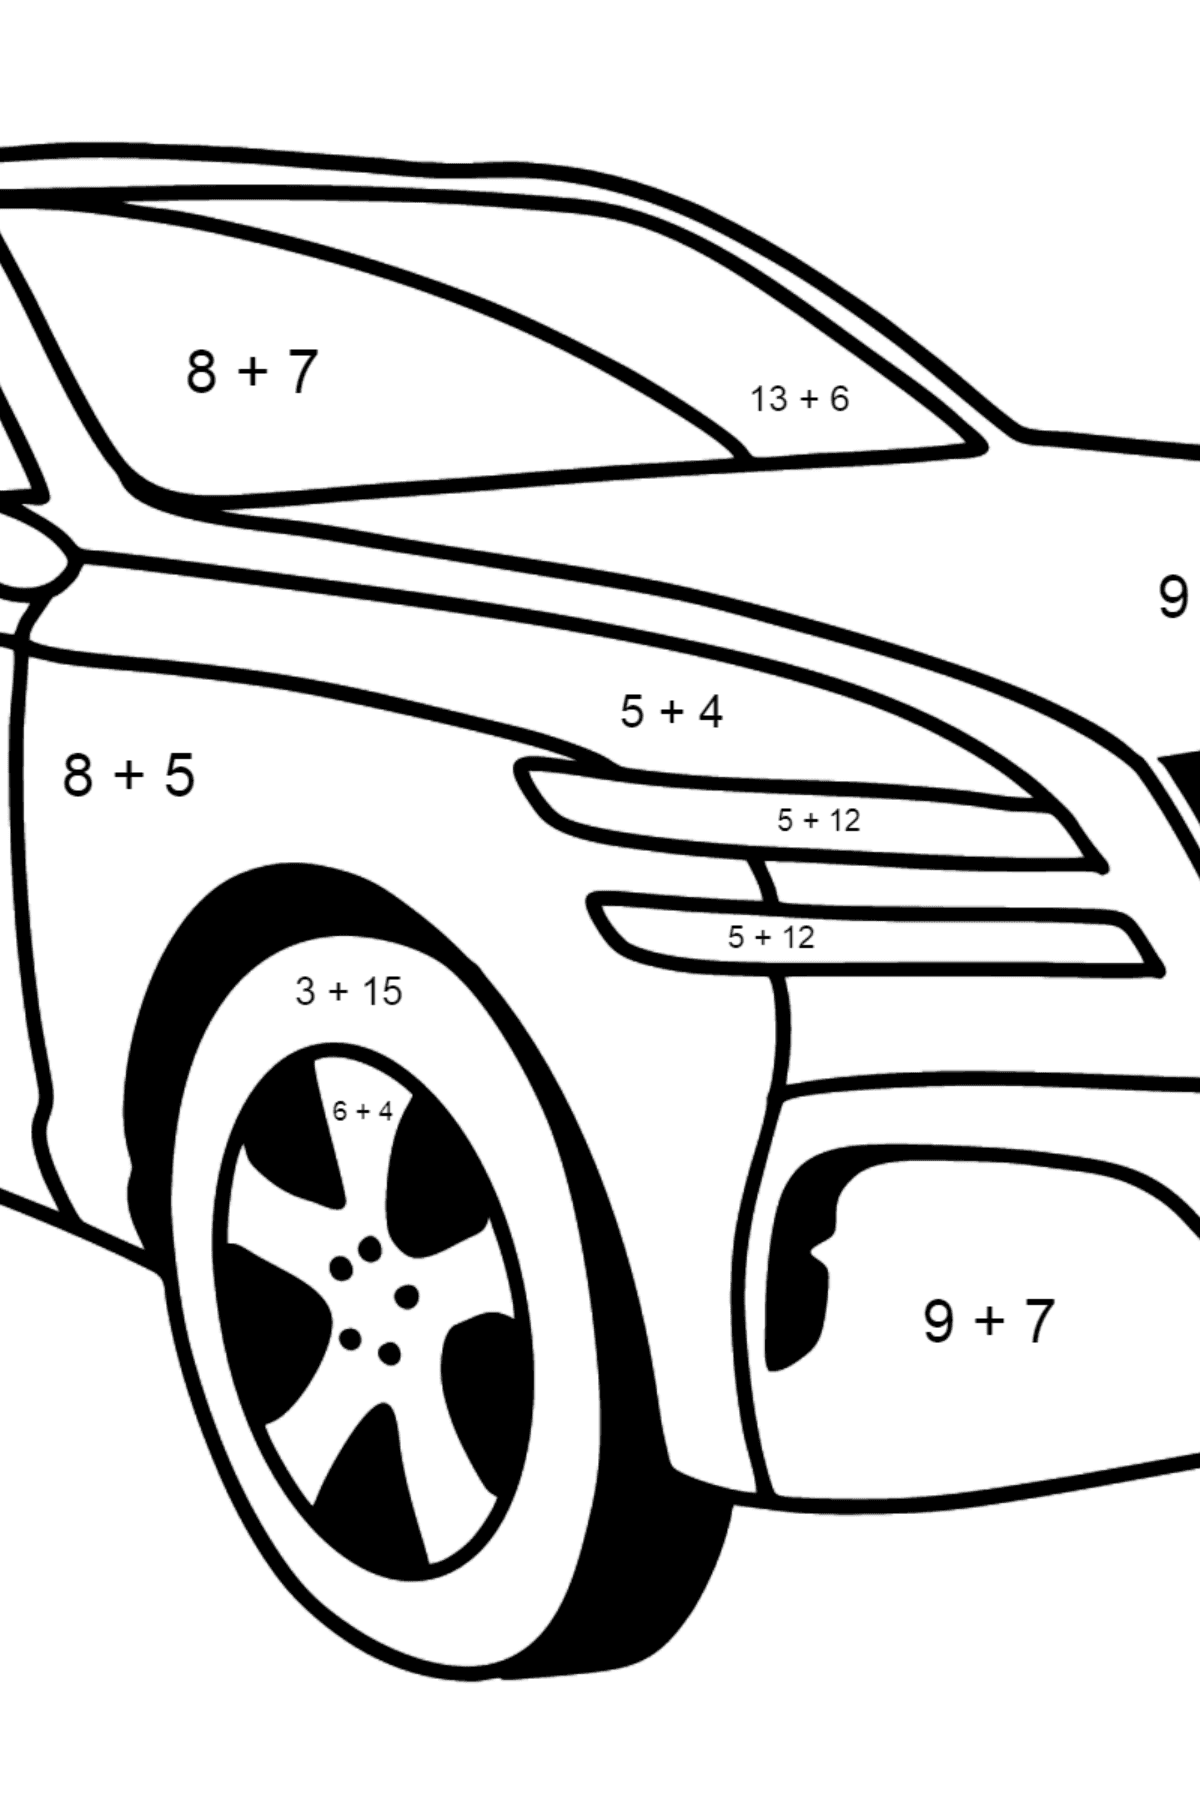 Genesis car coloring page - Math Coloring - Addition for Kids